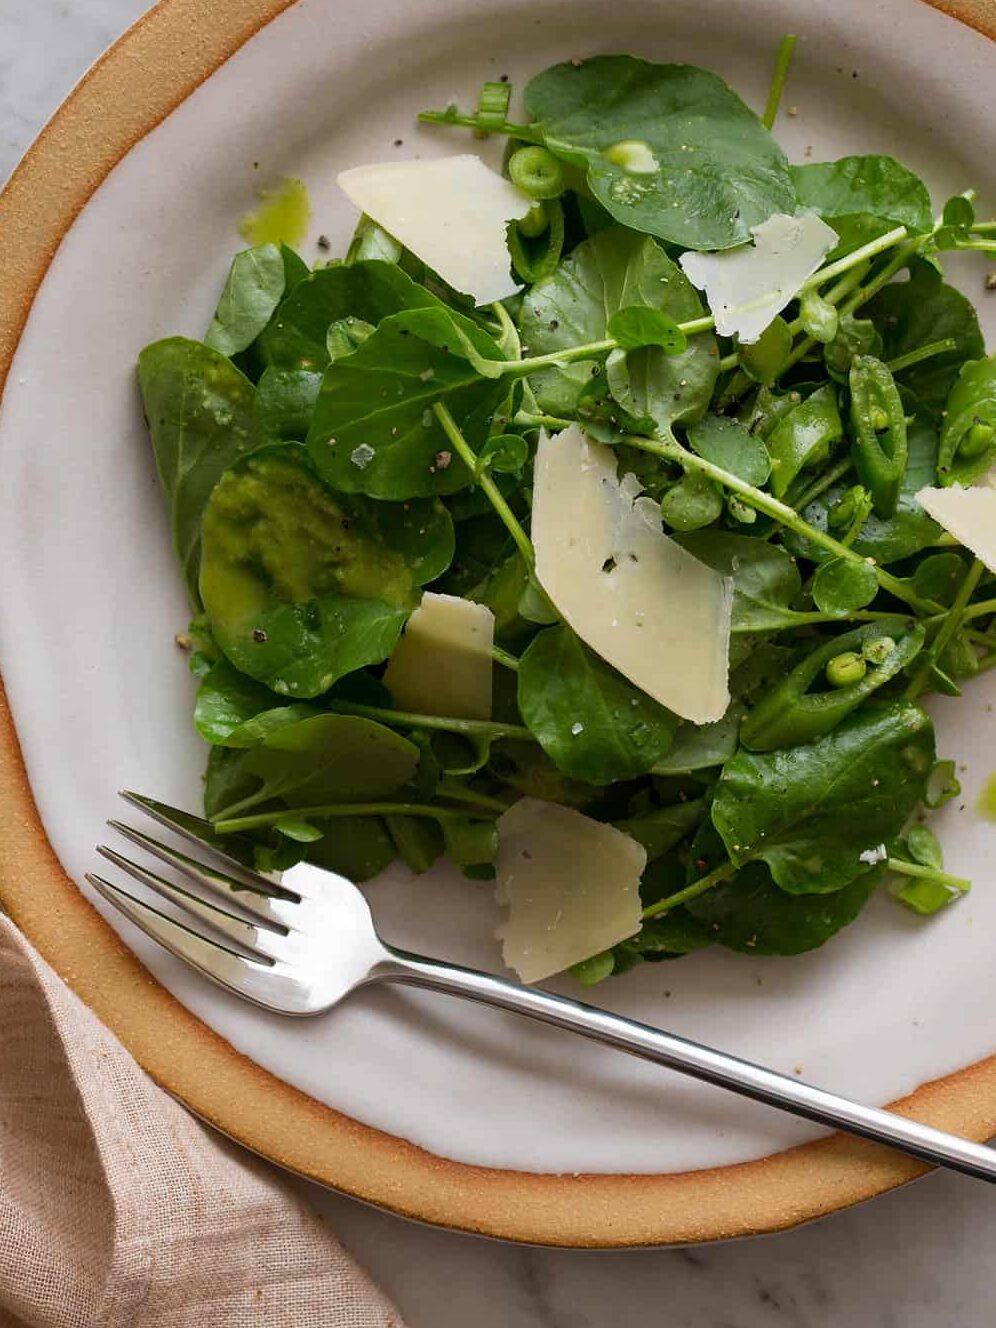 A close up of a plate of watercress salad with green apple vinaigrette and a fork.